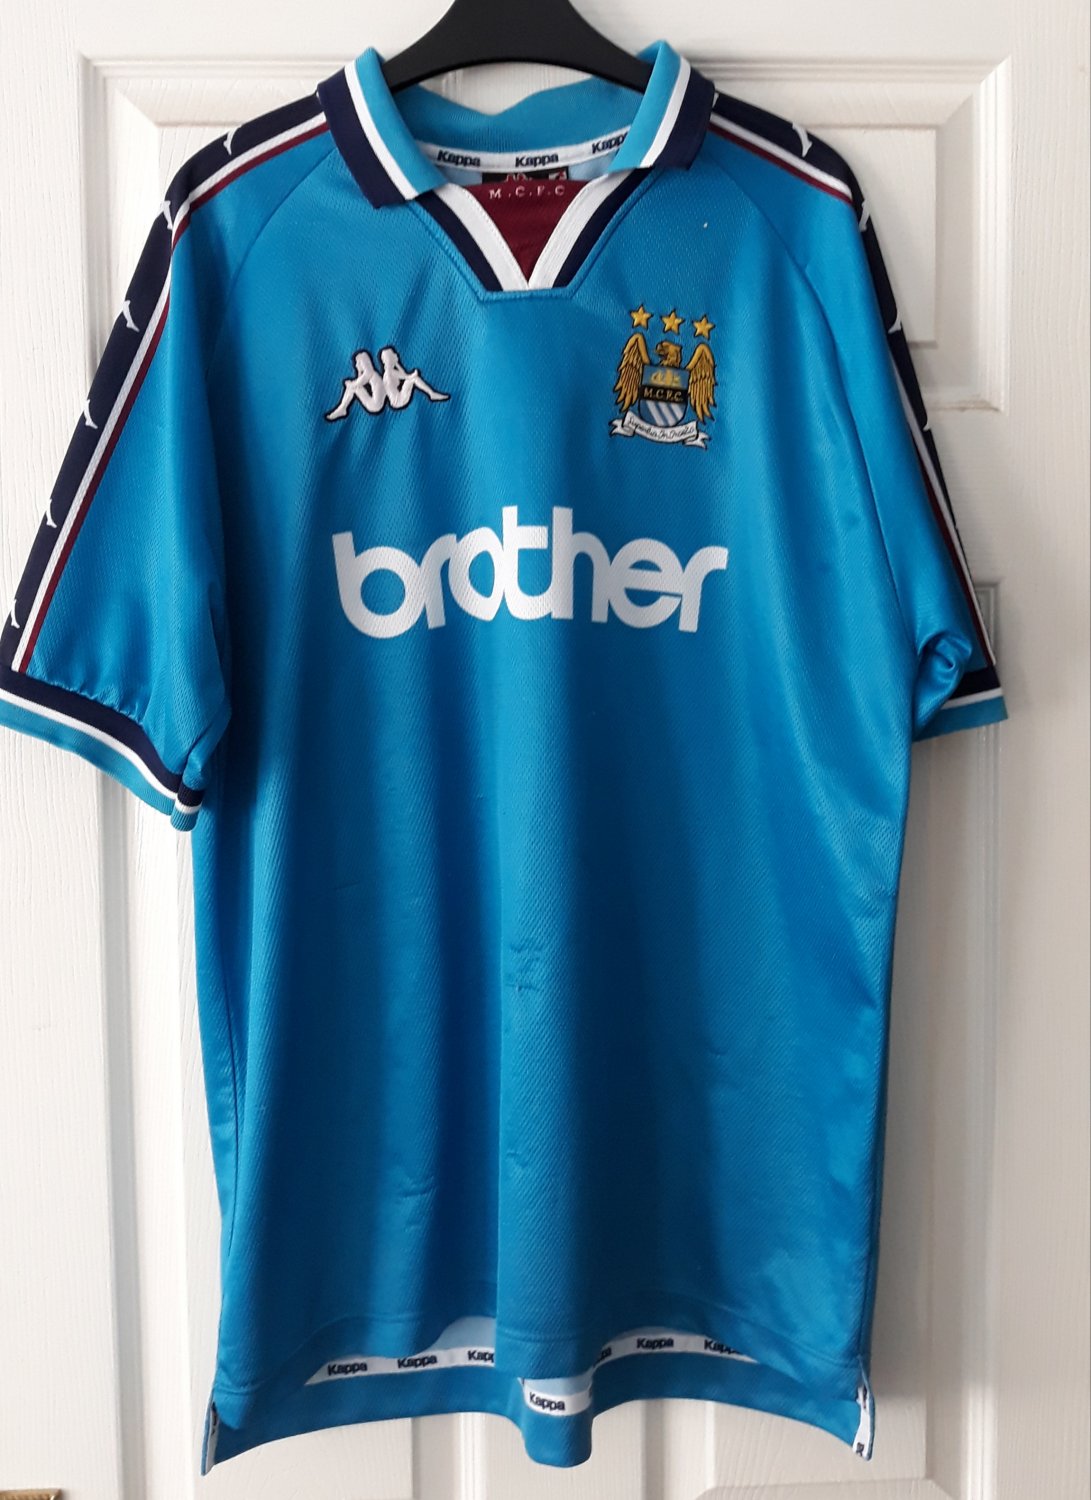 Manchester City Home football shirt 1997 - 1999. Sponsored by Brother